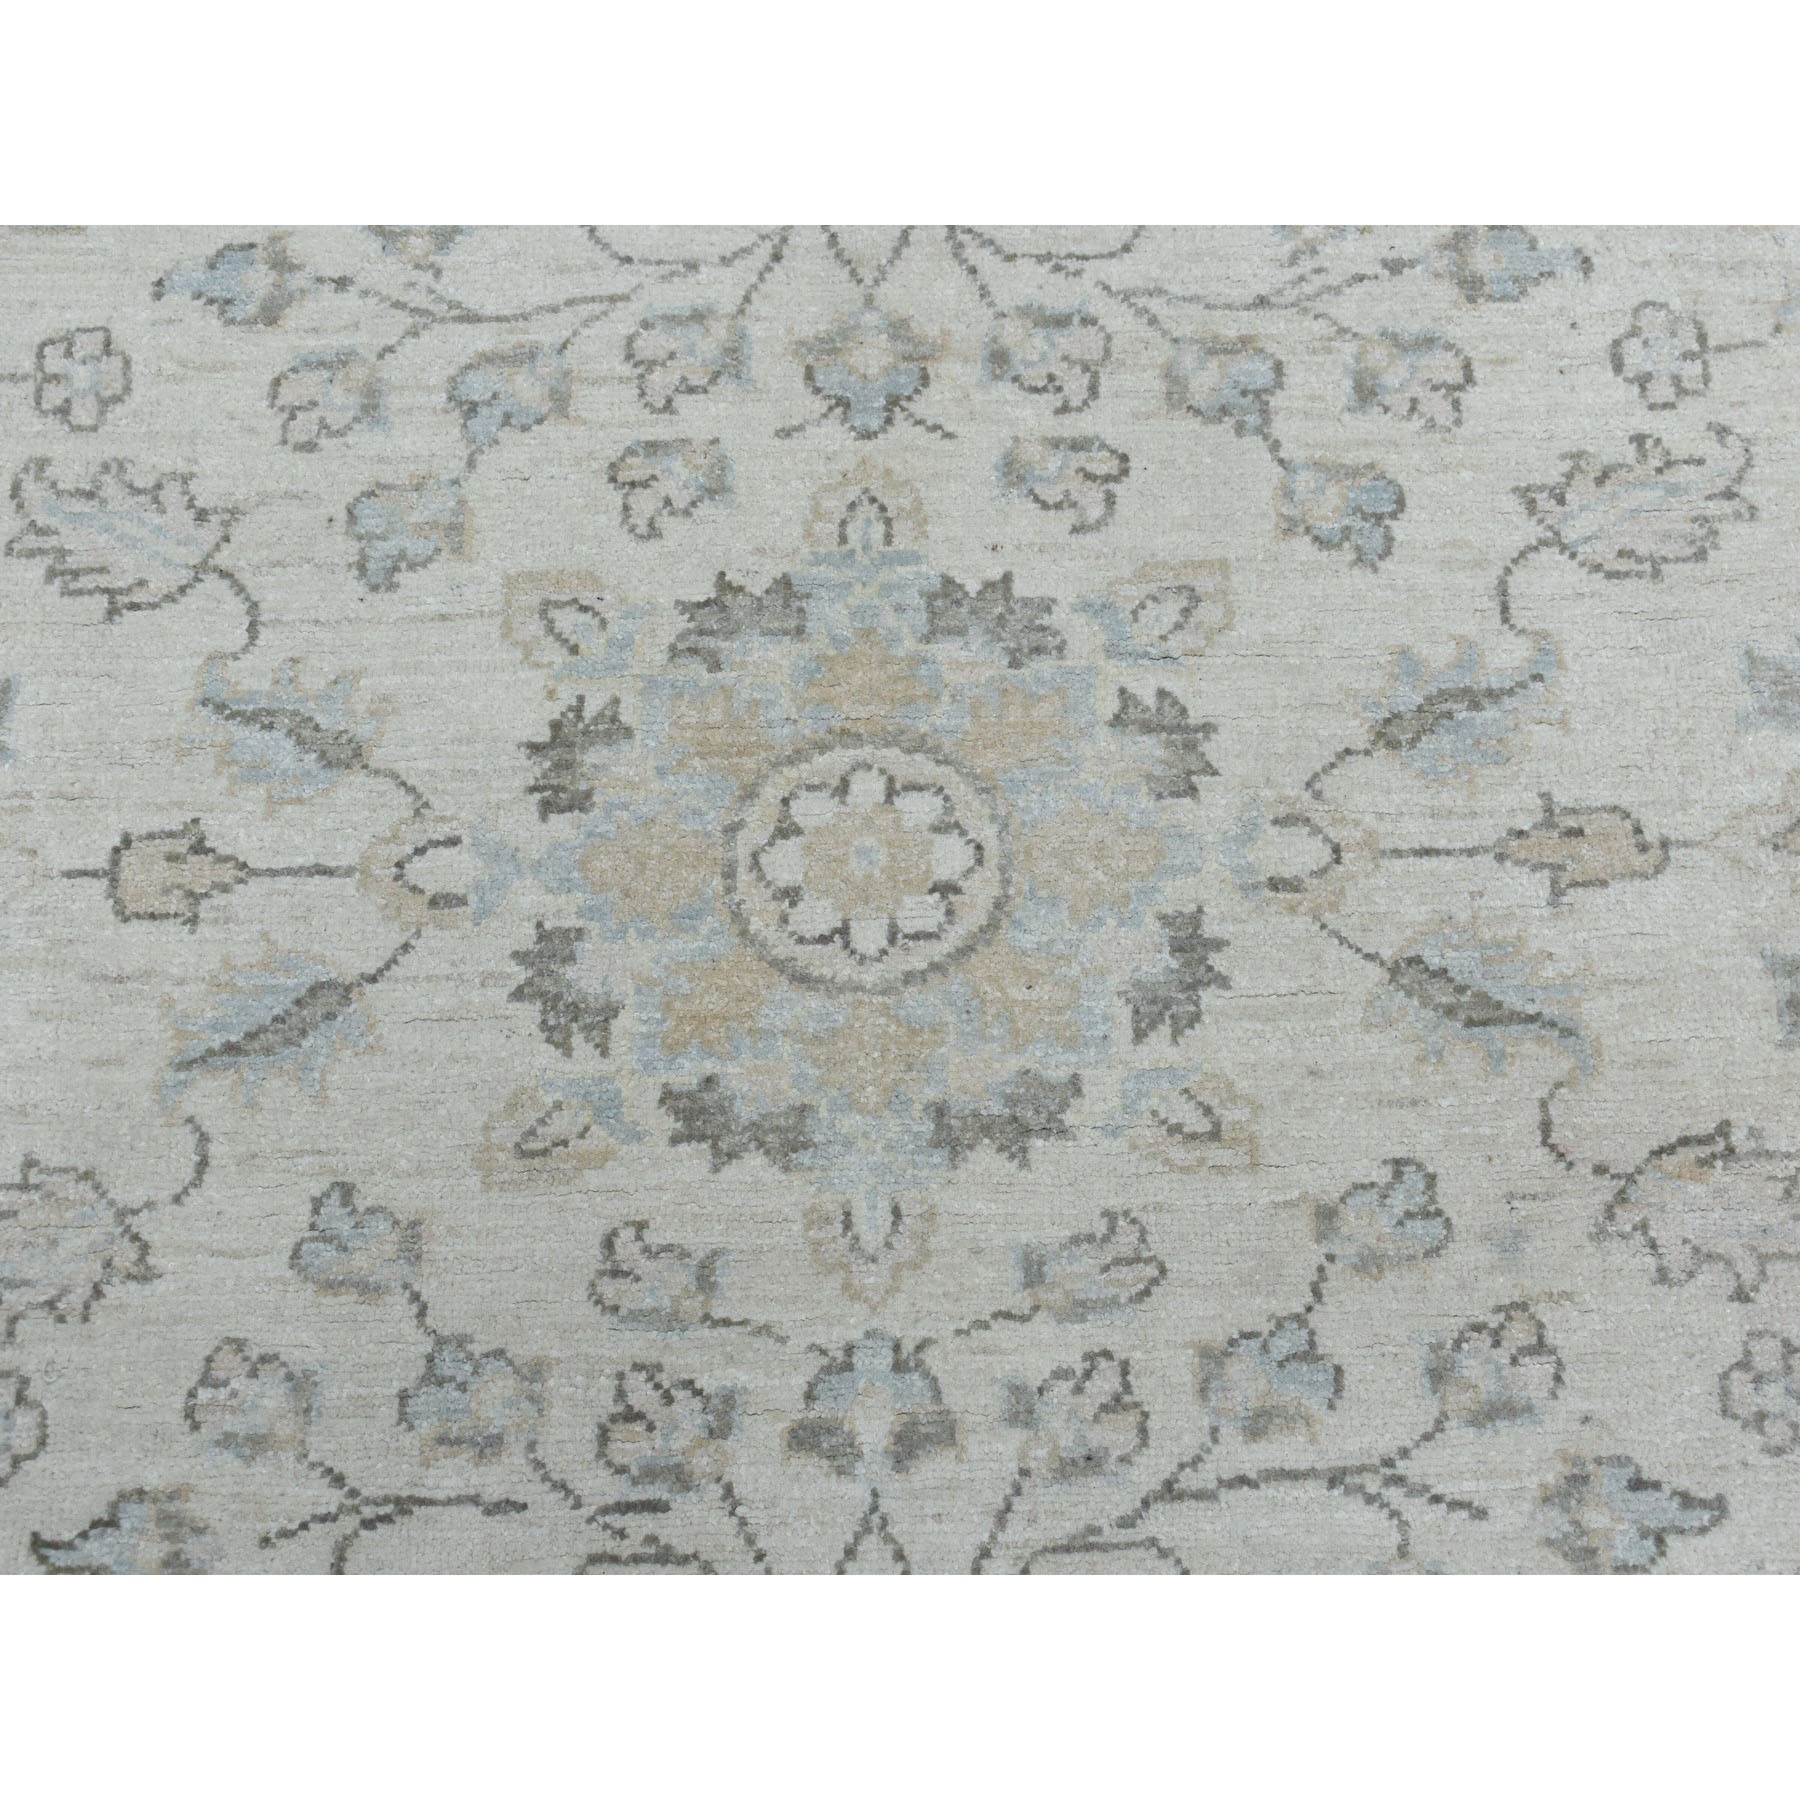 8-10 x12- White Wash Peshawar Pure Wool Hand Knotted Oriental Rug 